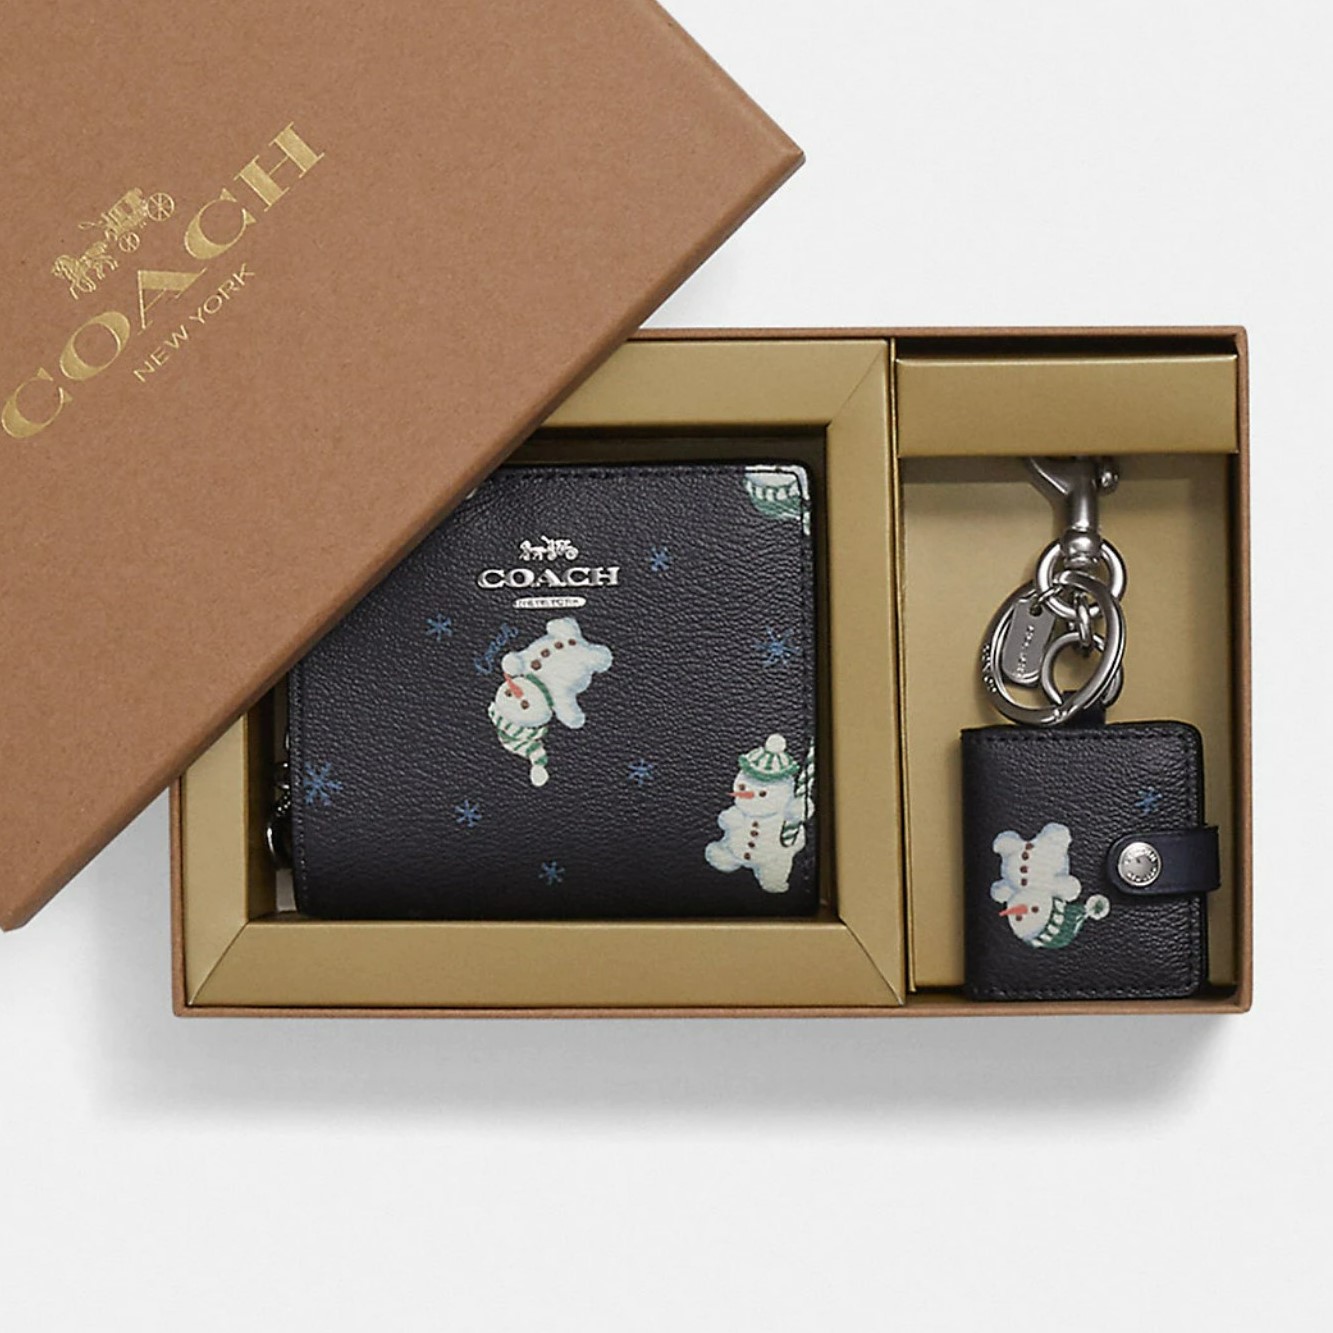 VÍ COACH BOXED SNAP WALLET AND PICTURE FRAME BAG CHARM WITH SNOWMAN PRINT 12